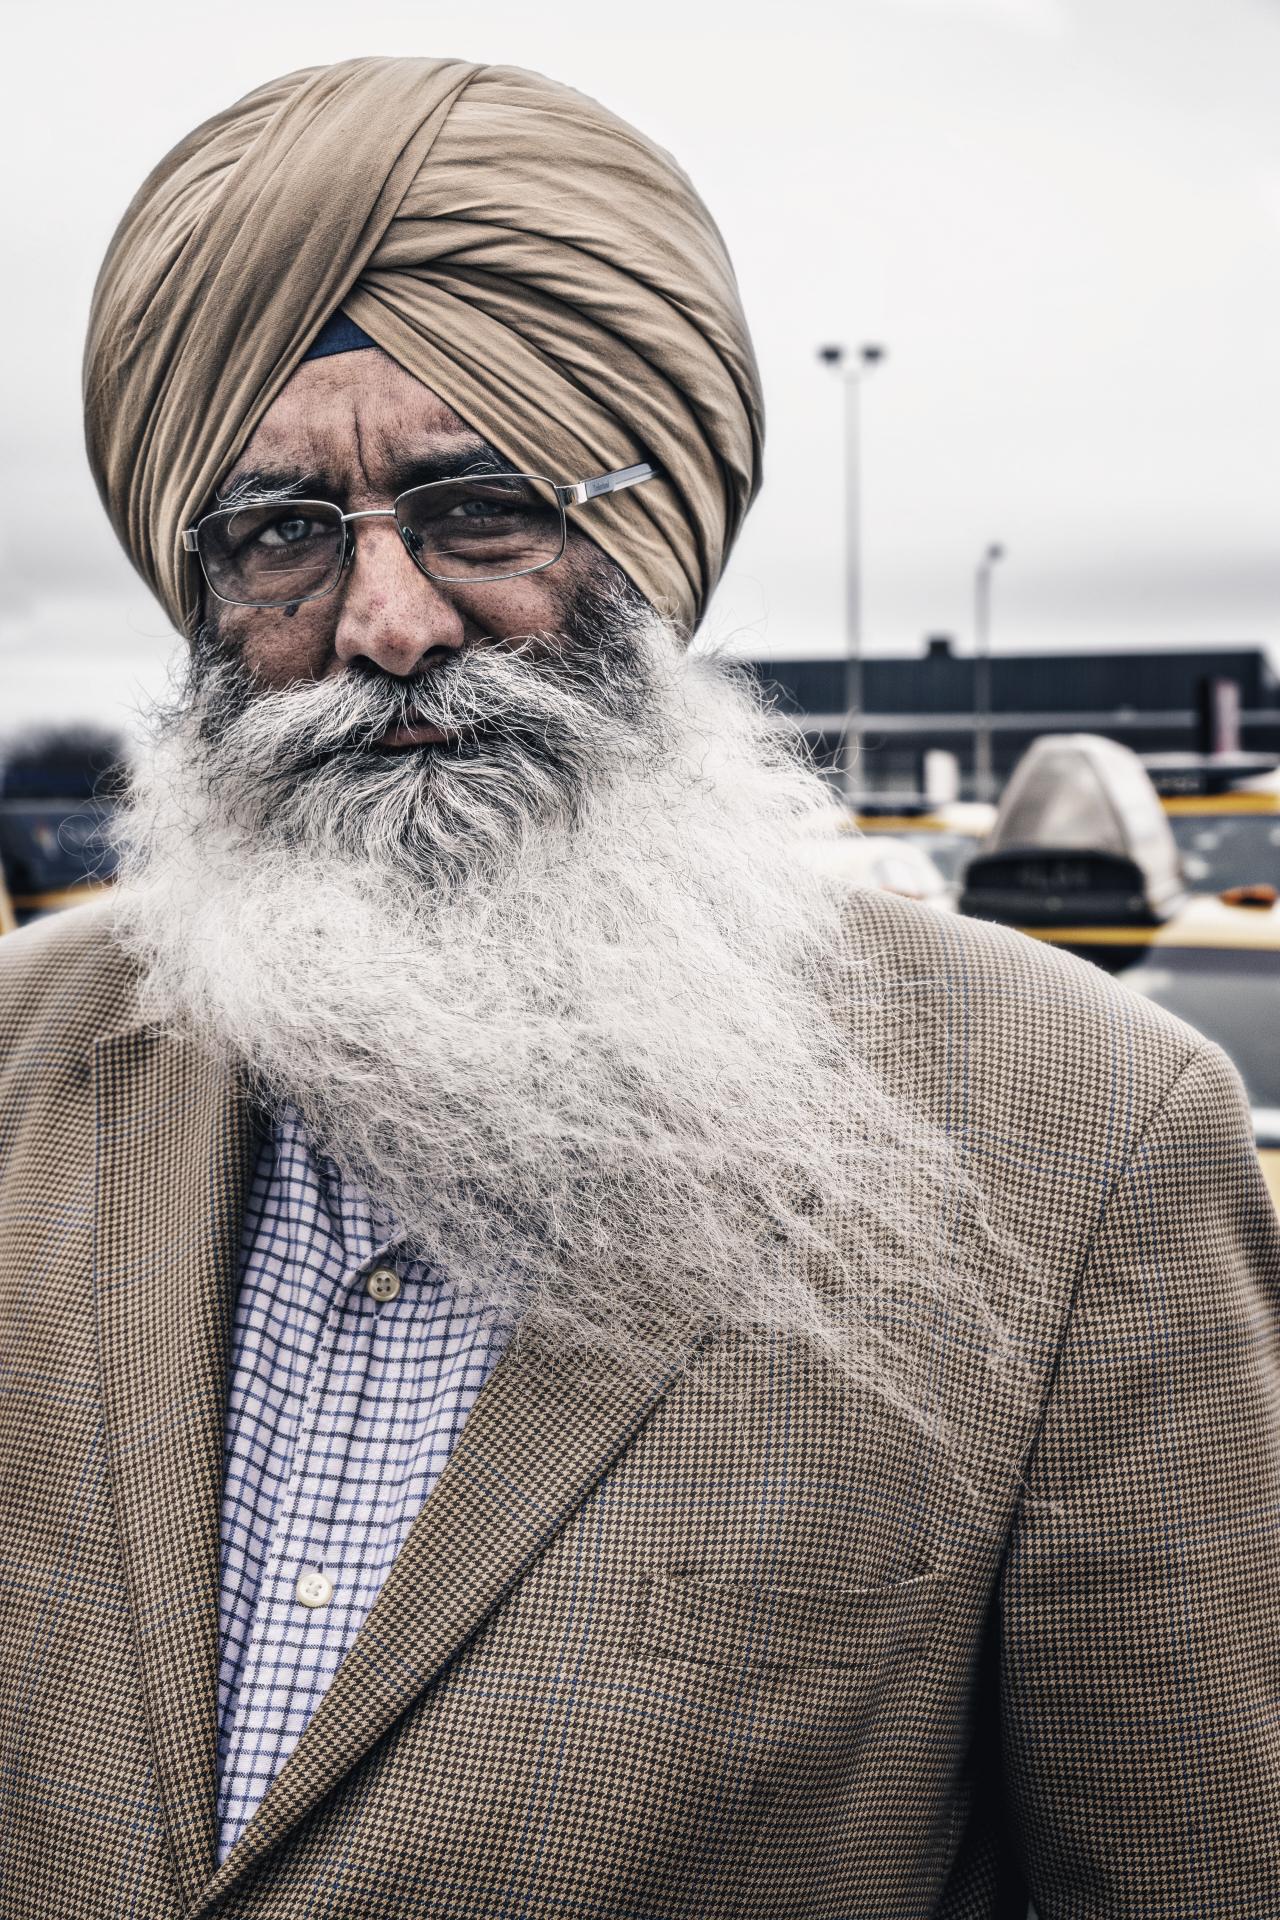 New York Photography Awards Winner - Taxi Drivers. Written In Their Faces